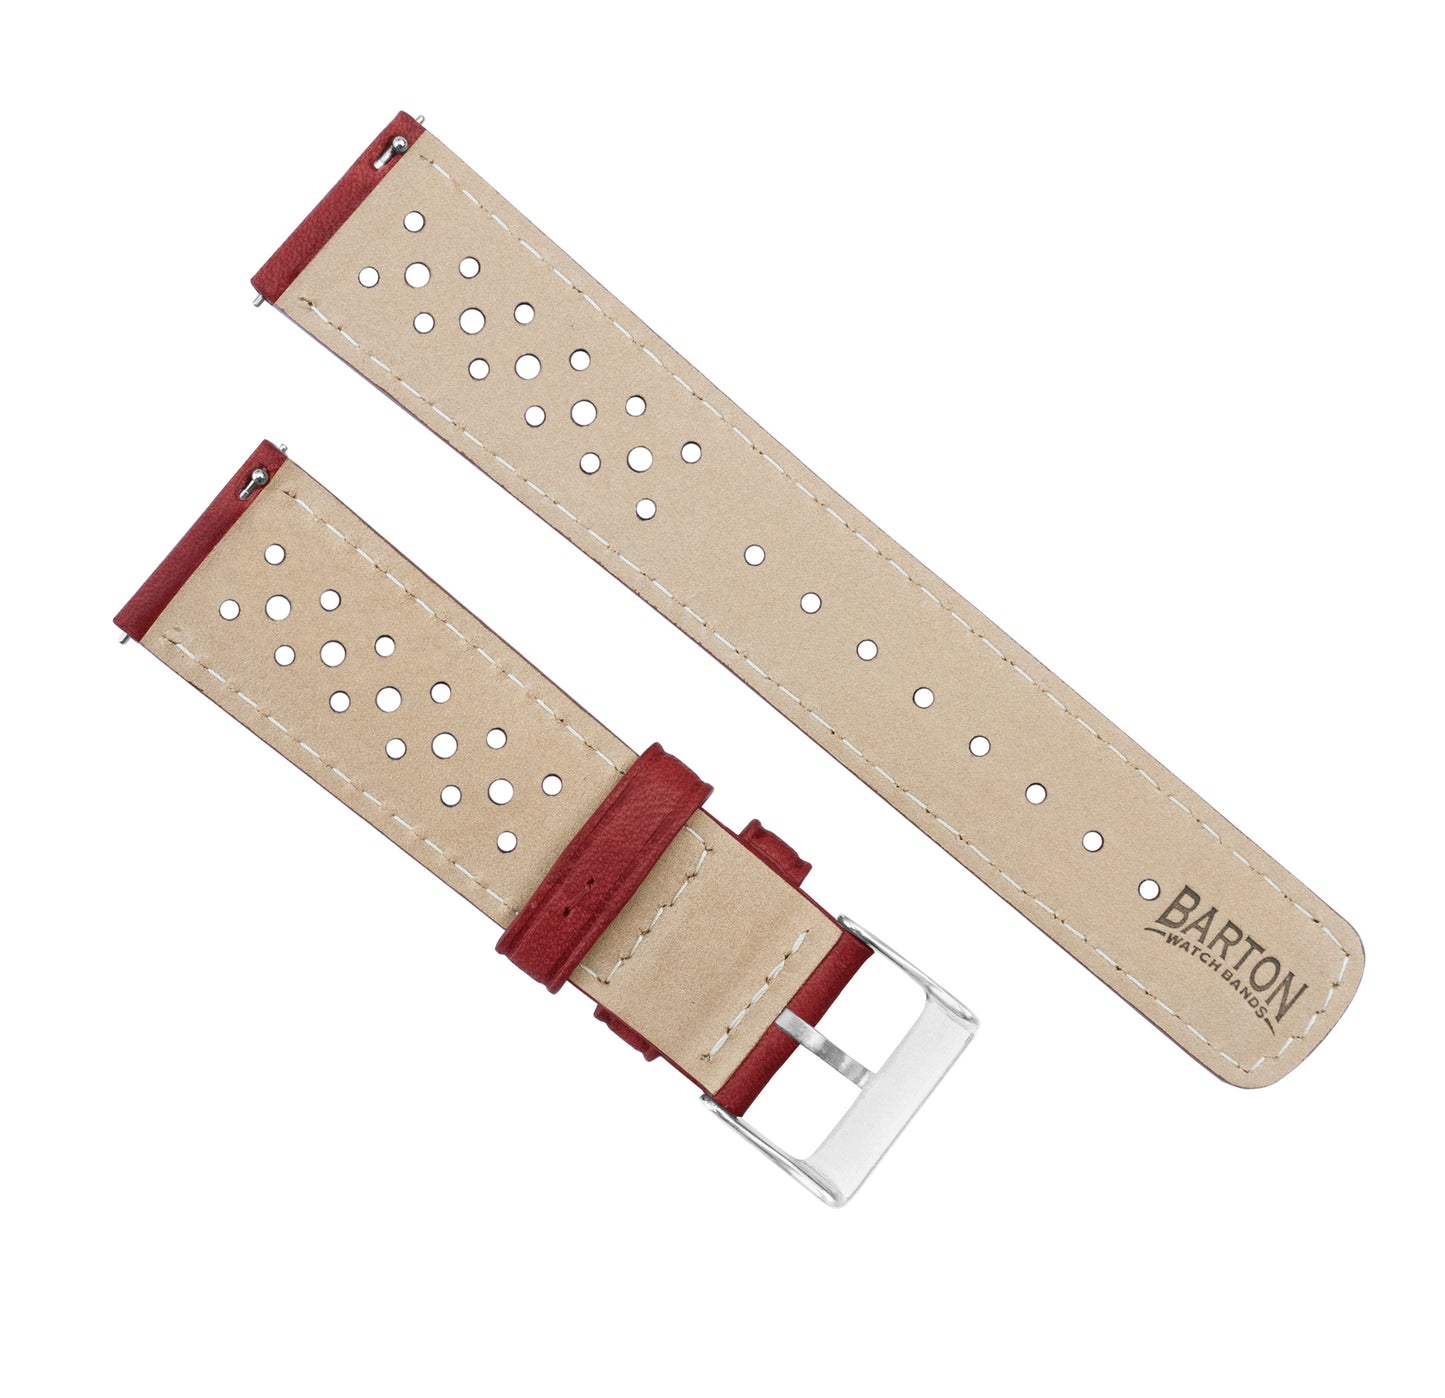 Mobvoi Ticwatch Racing Horween Leather Crimson Red Linen Stitch Watch Band